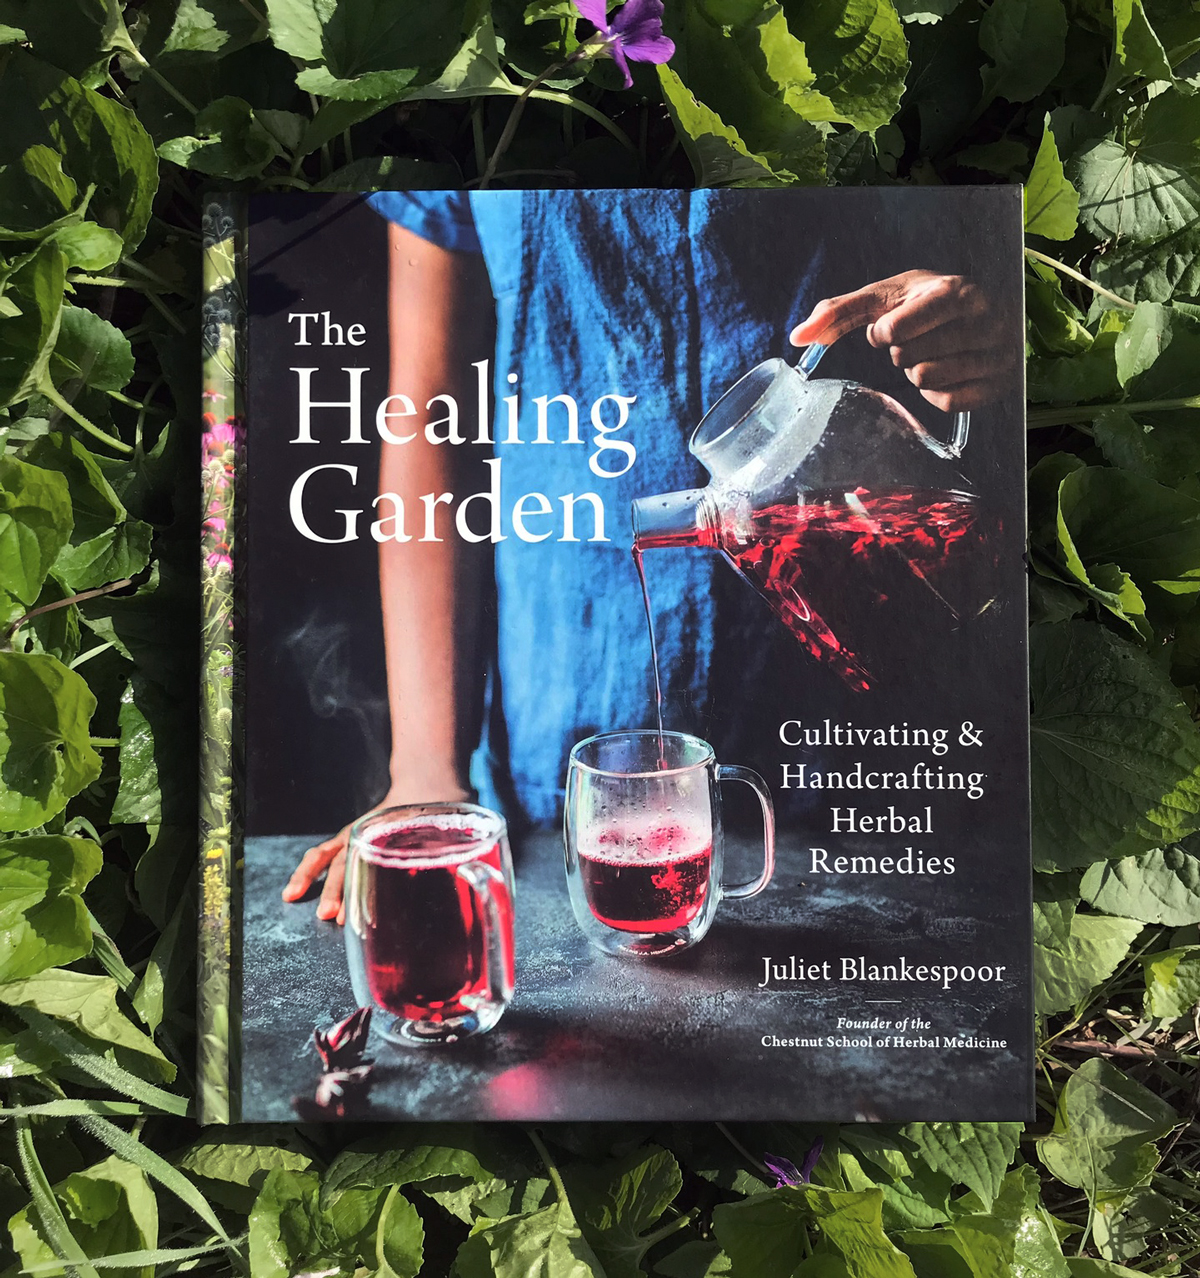 Juliet Blankespoor's book, The Healing Garden - Cultivating and Handcrafting Herbal Remedies is one of the best home herbal apothecary books.